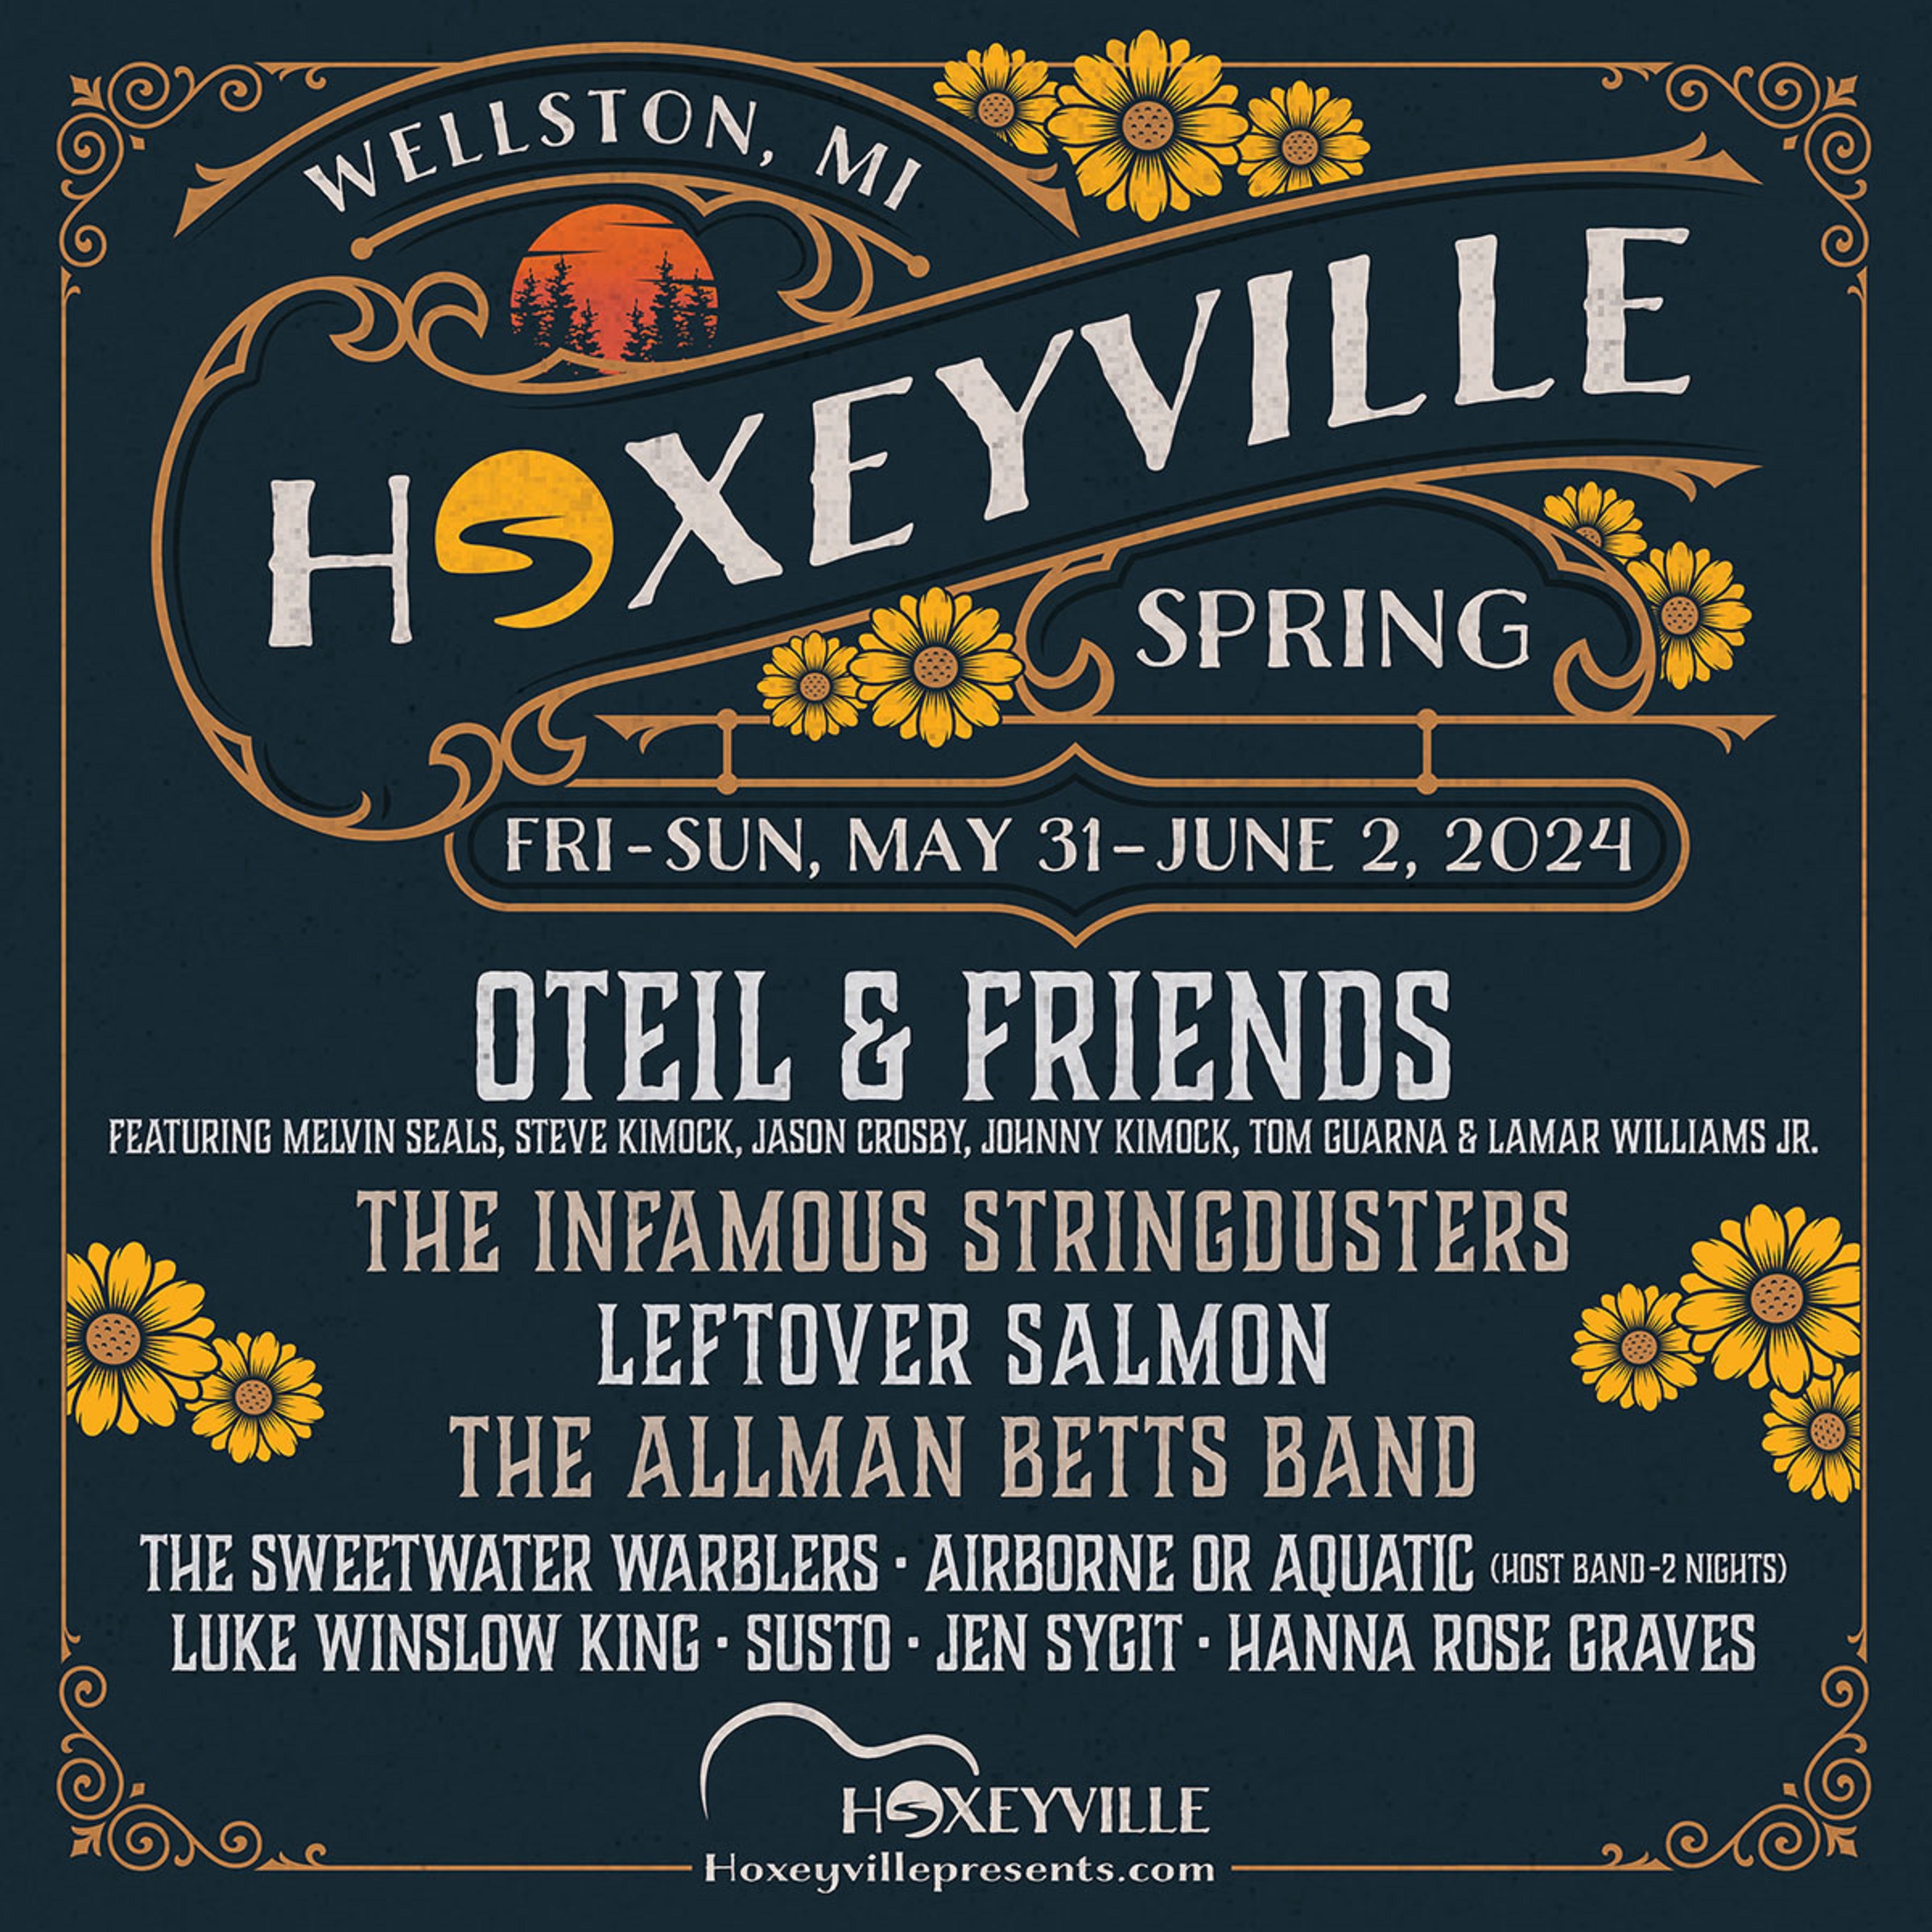 Announcing ‘Hoxeyville Spring’ Featuring Oteil & Friends, The Infamous Stringdusters, Leftover Salmon & More May 31 - June 2